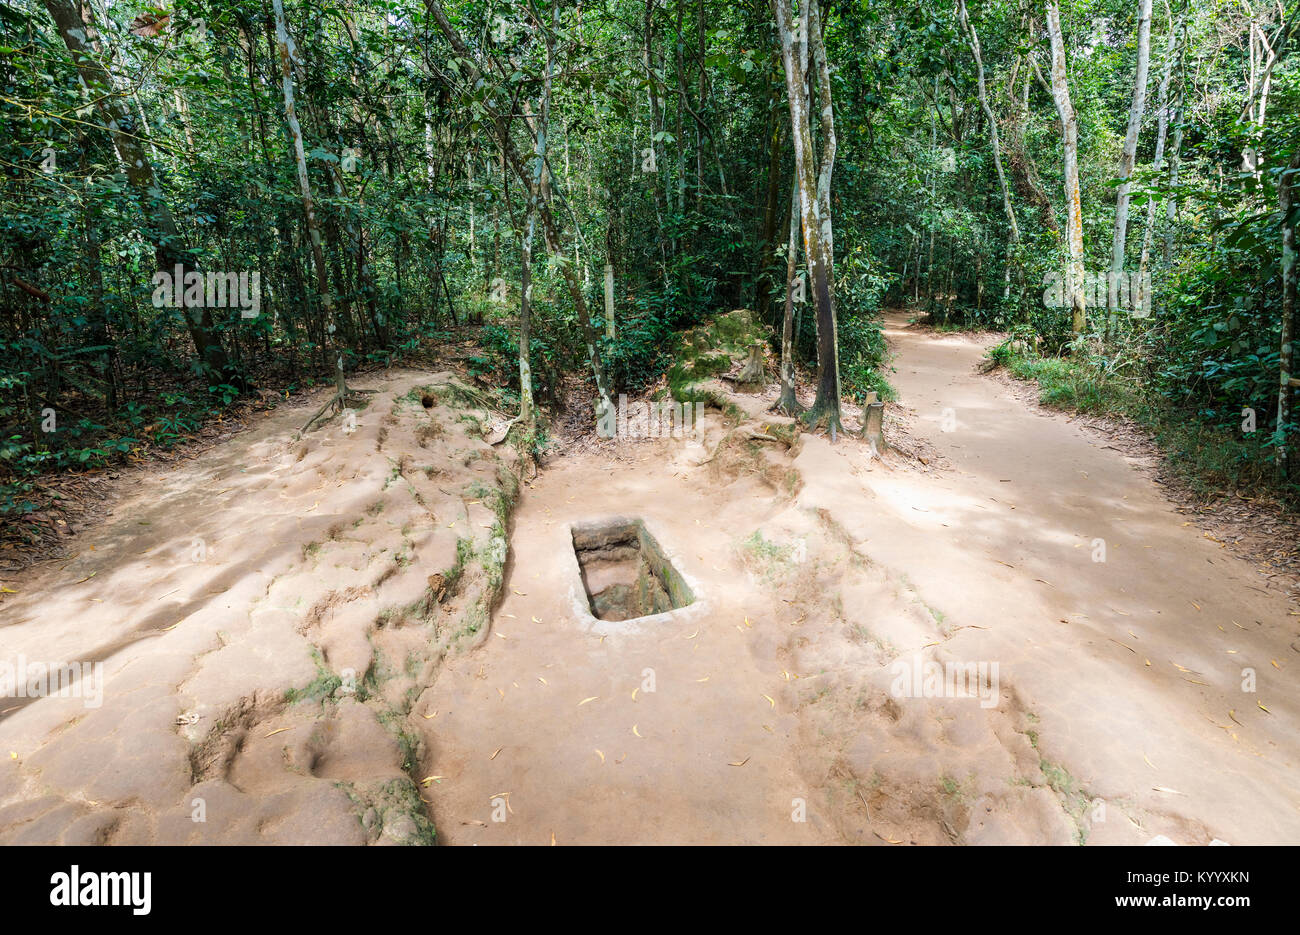 Entrance to a tunnel in the iconic Cu Chi Tunnel network, hidden Viet Cong tunnels, now a memorial park, Saigon (Ho Chi Minh City), south Vietnam Stock Photo